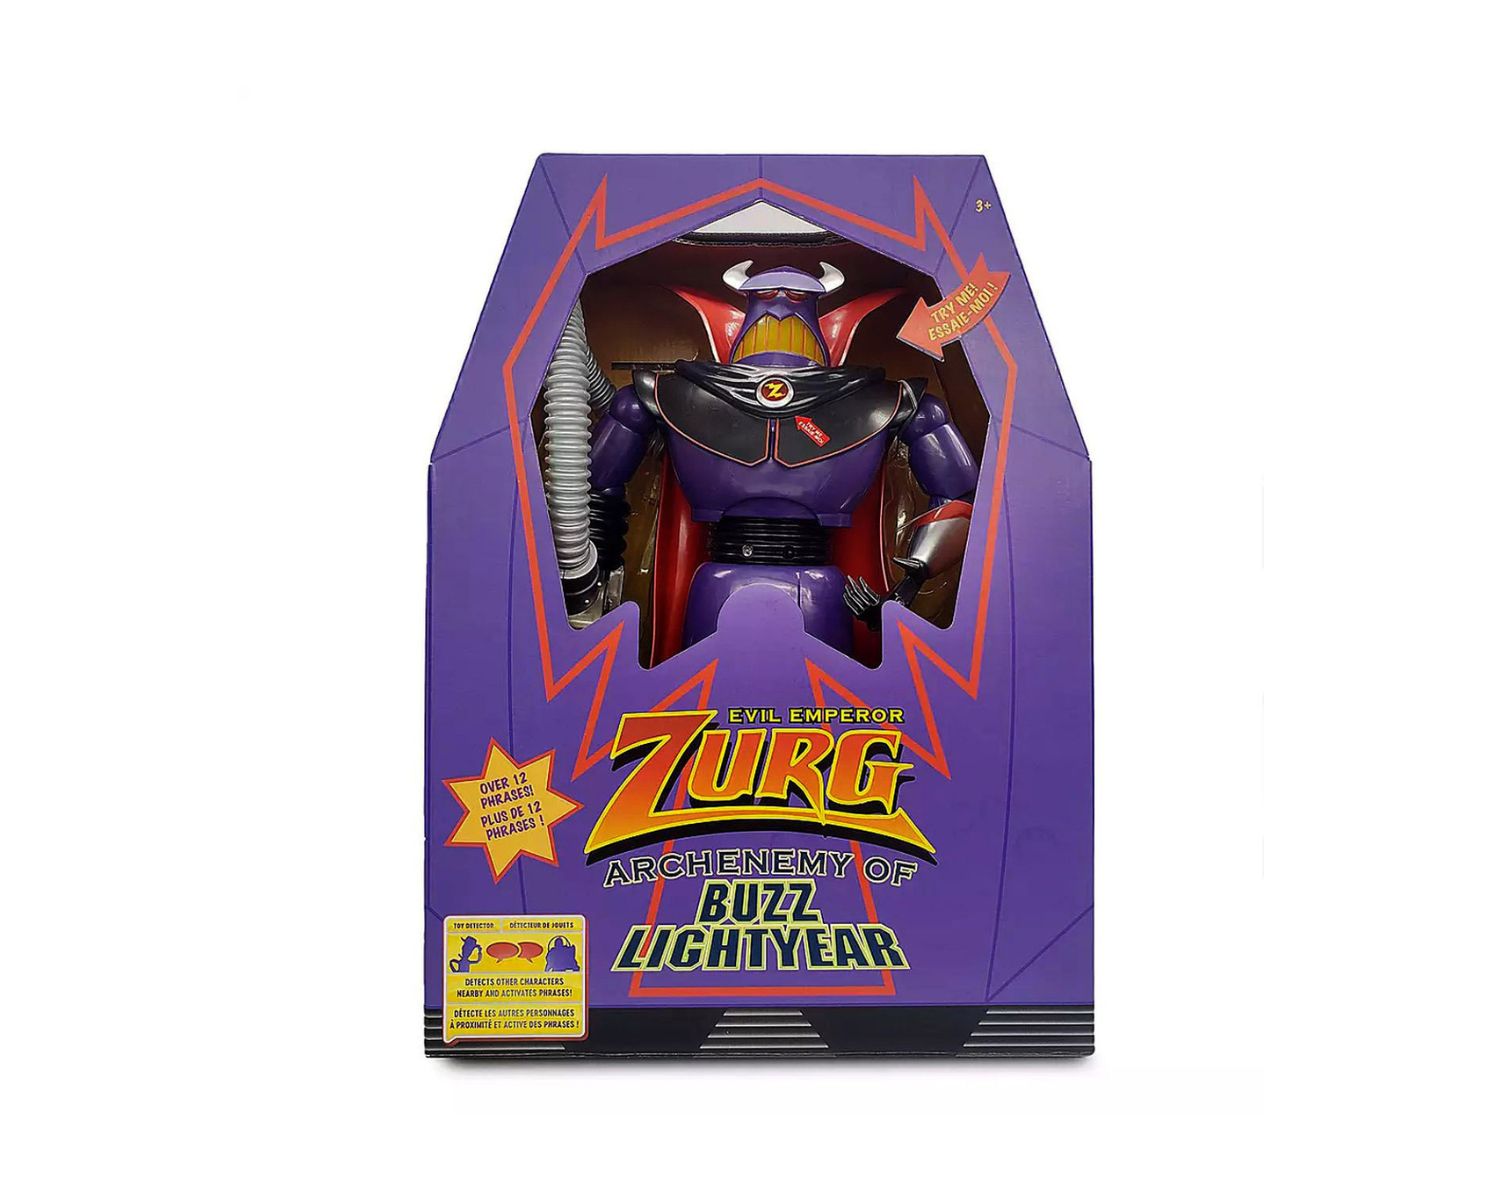 17-astonishing-facts-about-zurg